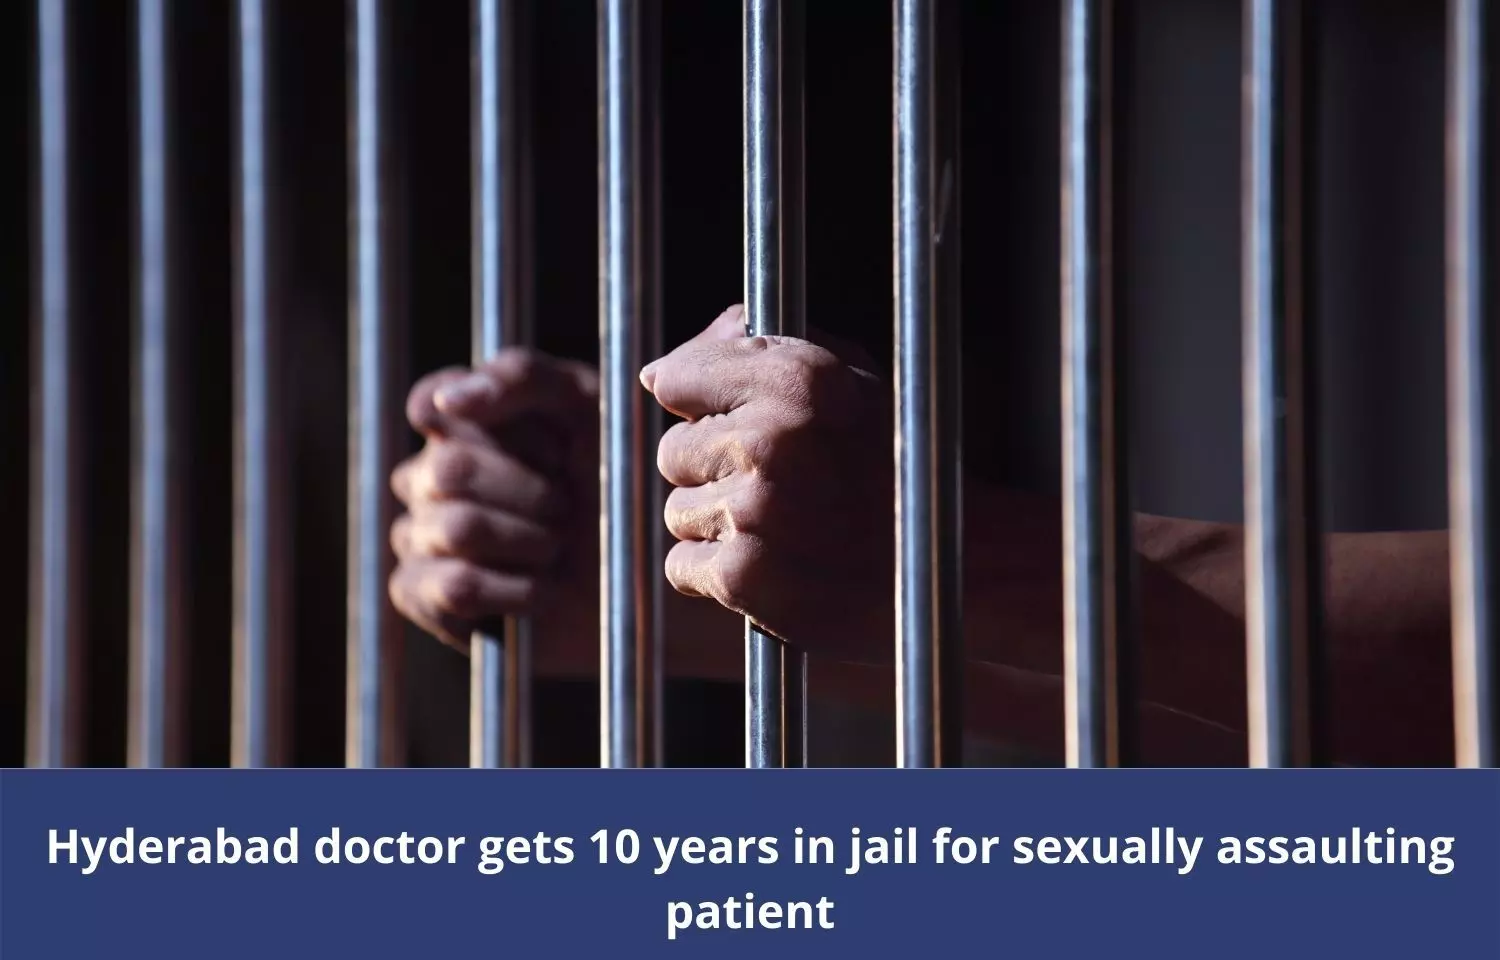 Hyderabad doctor gets 10 years in jail for sexually assaulting patient